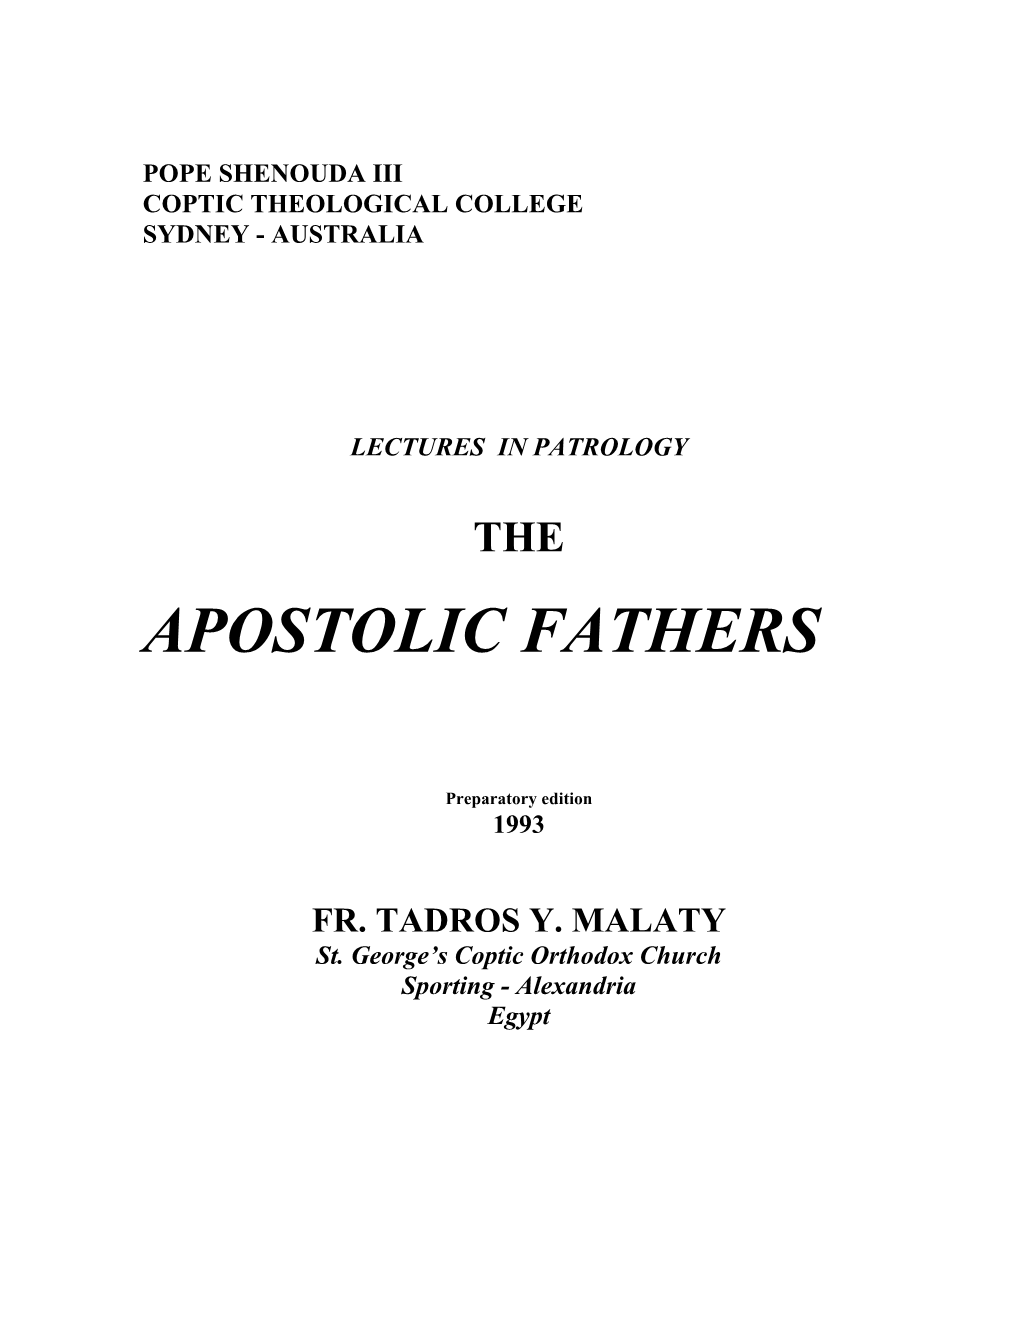 The Apostolic Fathers Writings Refer To: 1